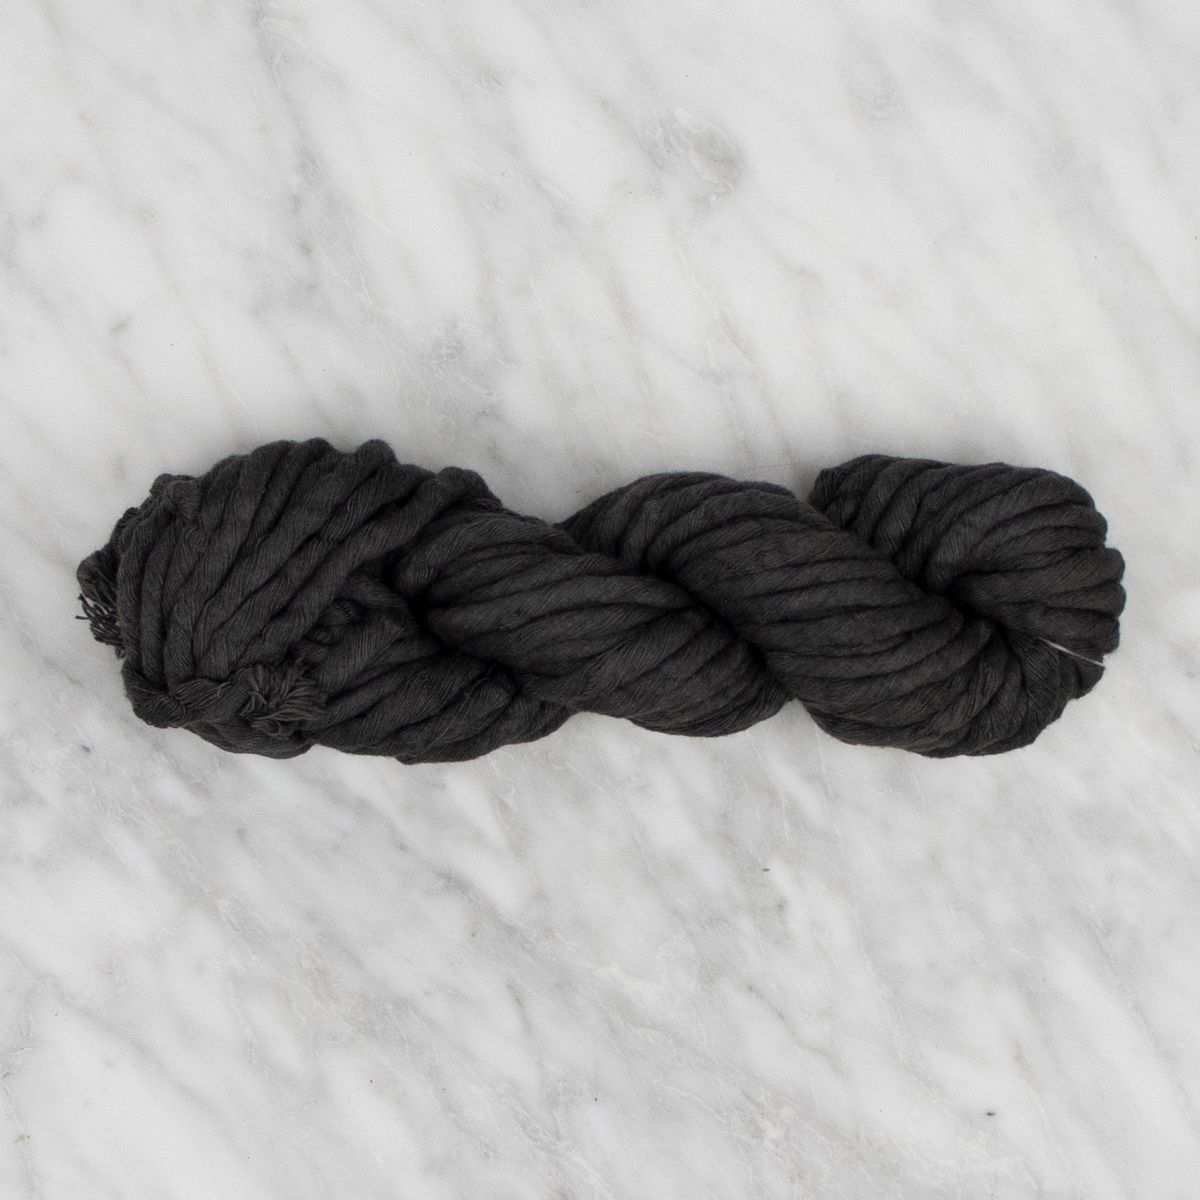 5mm Hand-Dyed Cotton String - Coal - 100 grams